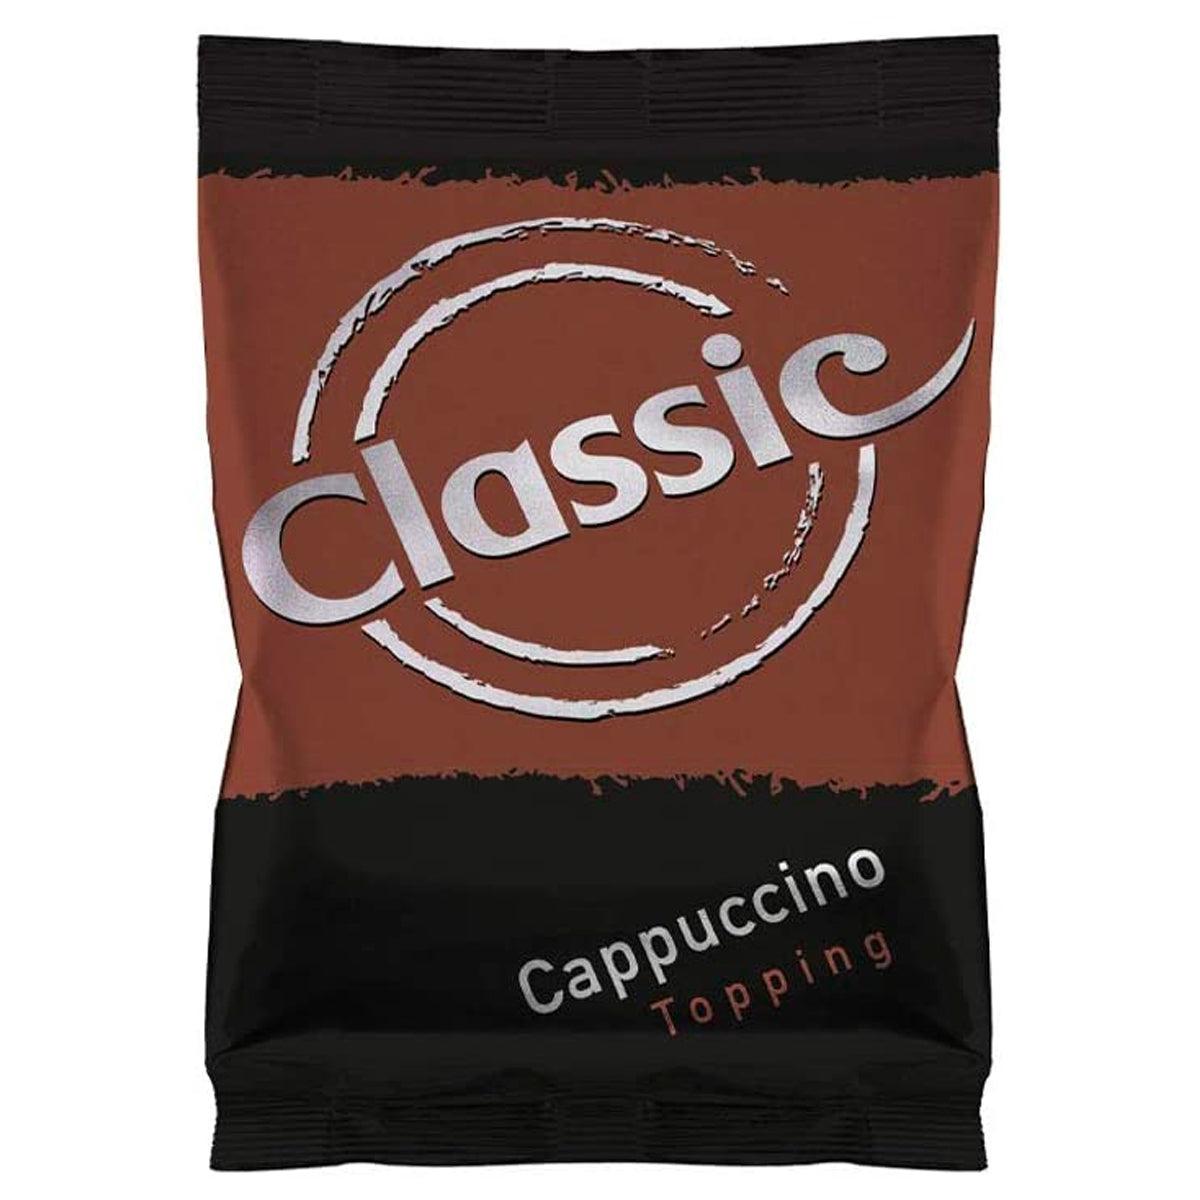 Classic Cappuccino Topping - 750g Bag - Vending Superstore